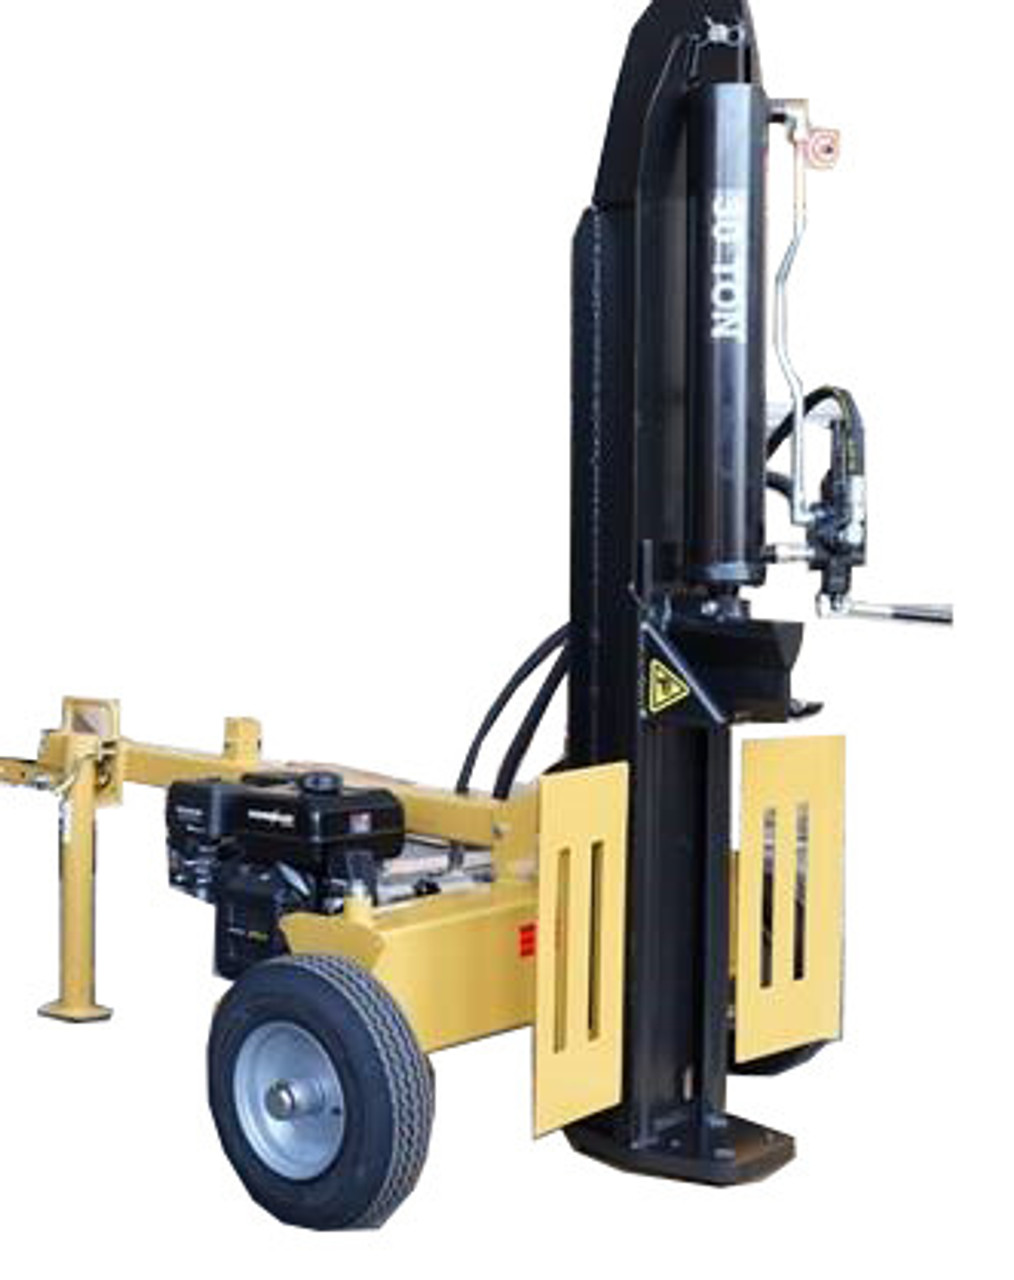 35 Ton Log Splitter With Superpower Feedback Rato Engine - Electric Start